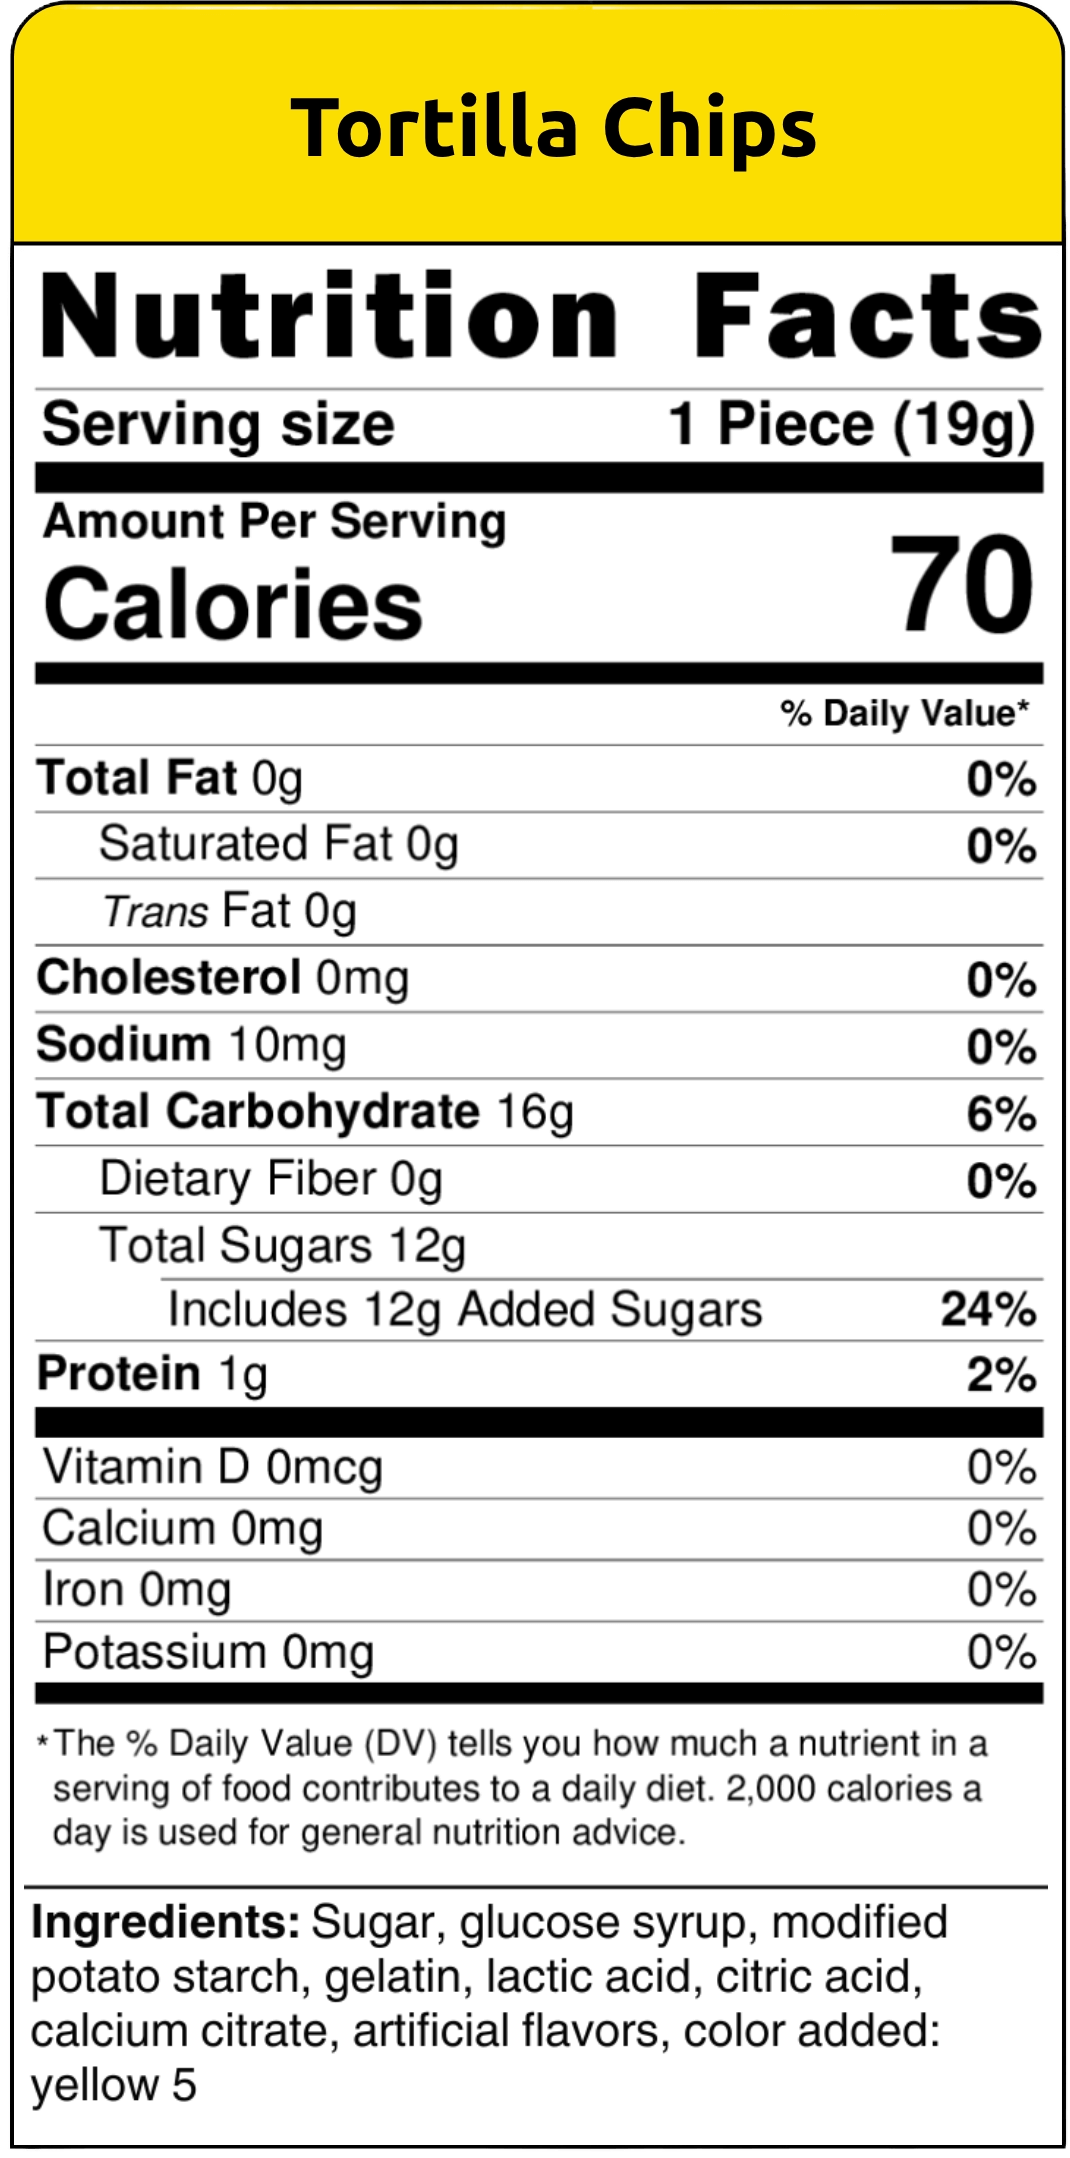 nutritional facts tortilla chips